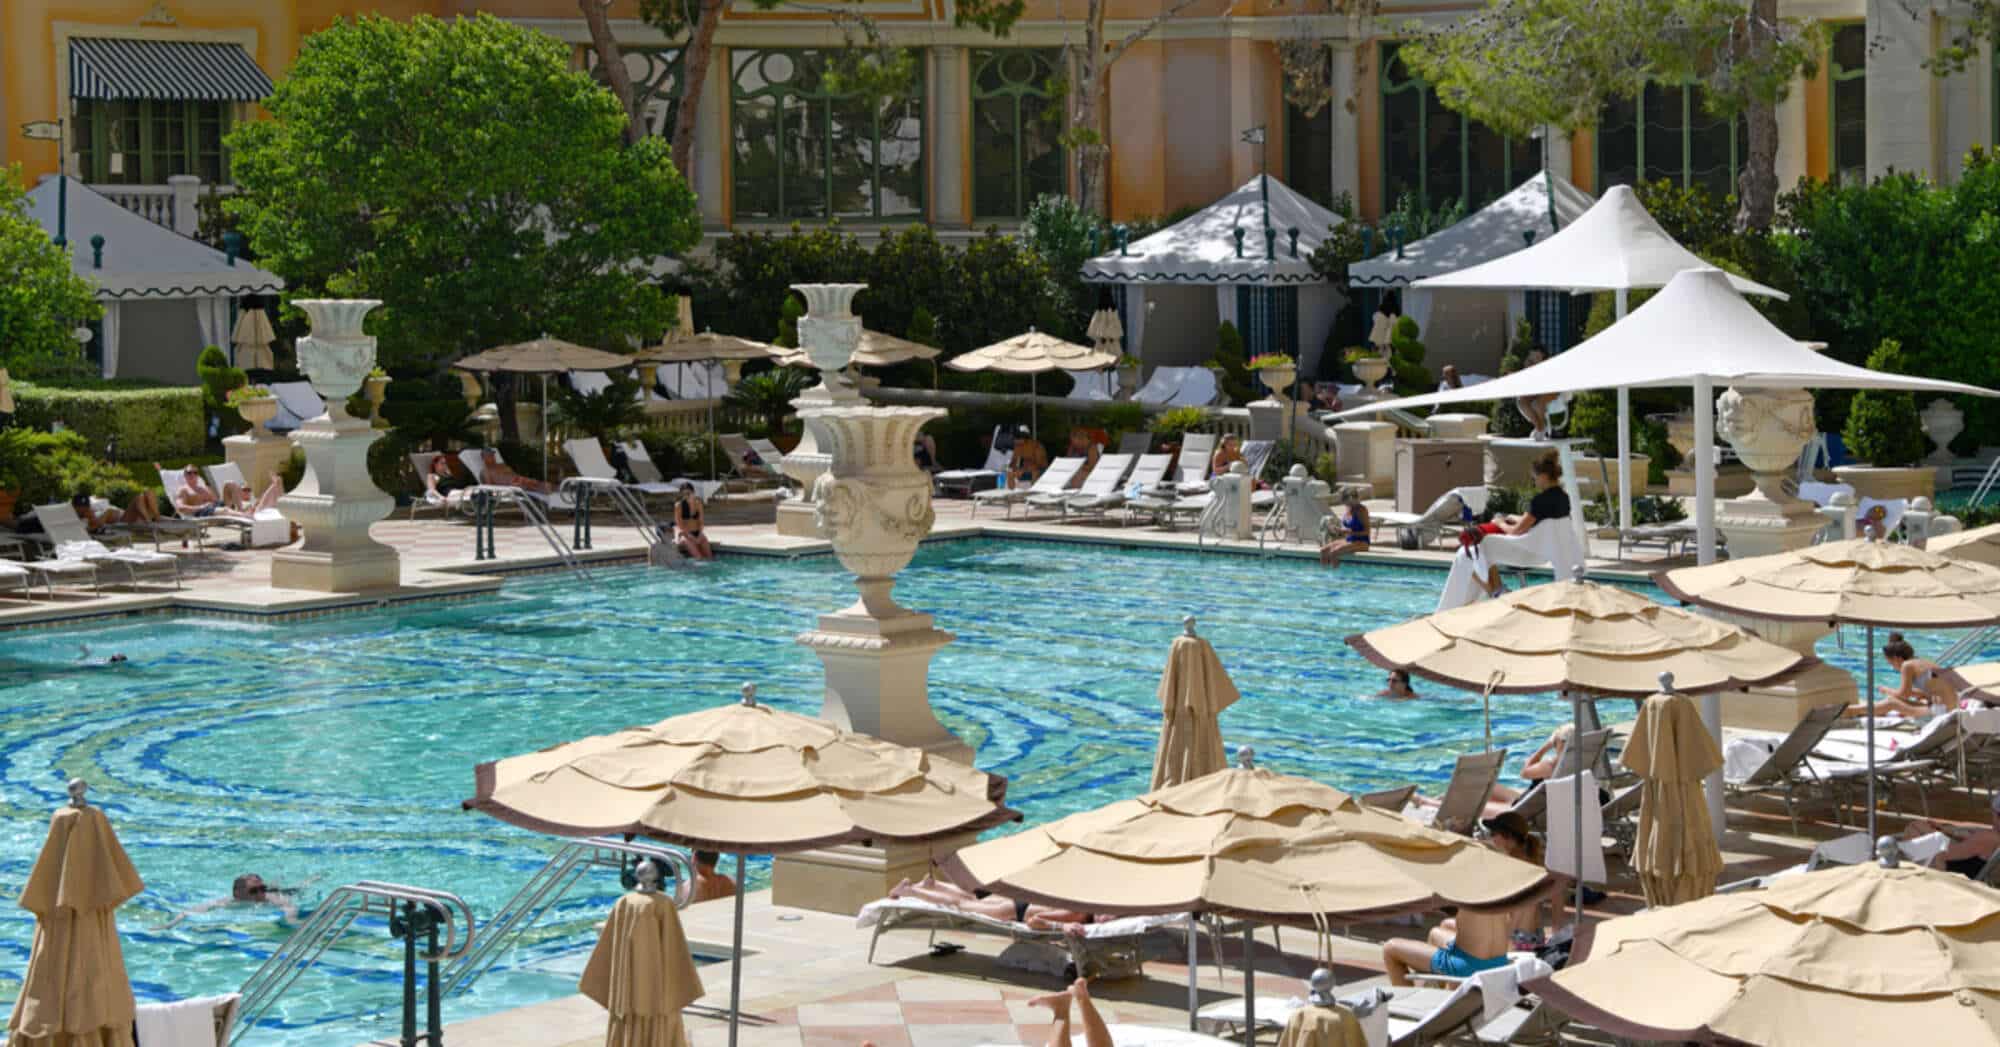 Image of the pool at The Bellagio